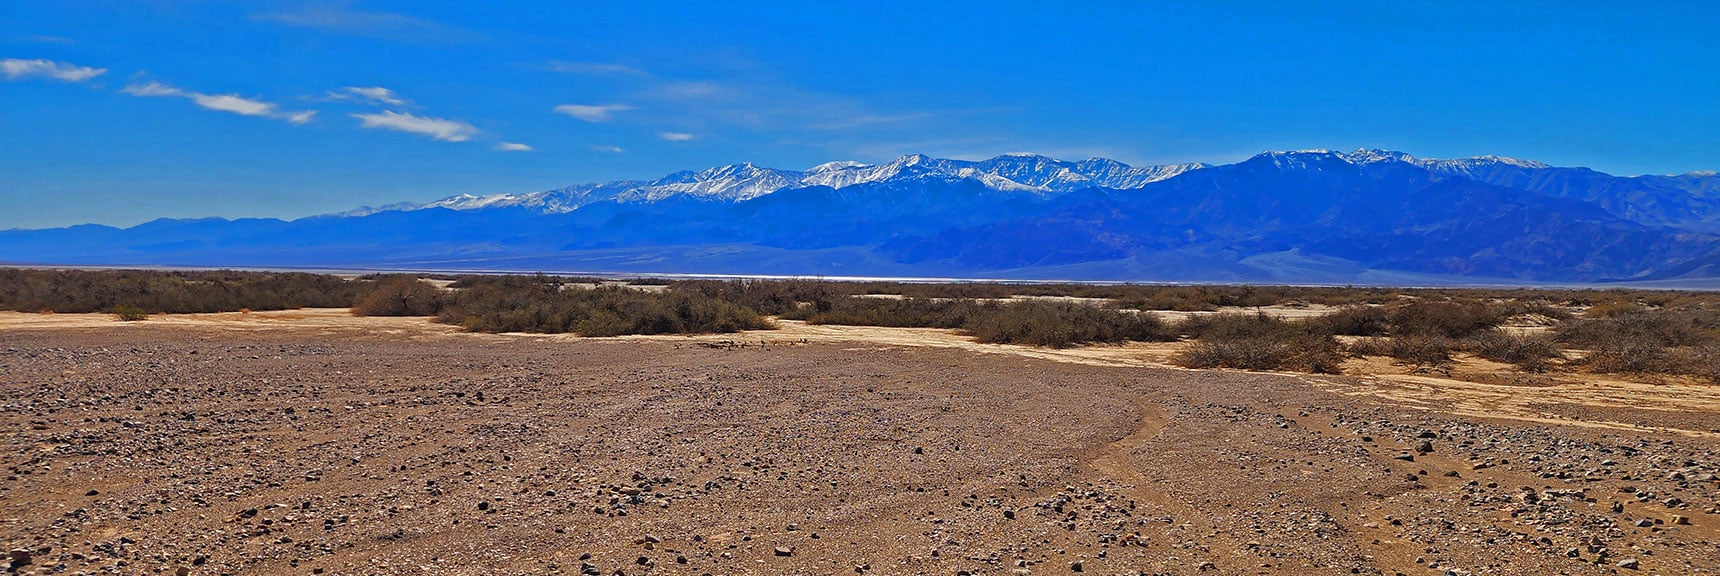 Mesquite Grove Viewed from Badwater Road North of Golden Canyon Entrance | Mesquite Grove | Death Valley, California | David Smith | Las Vegas Area Trails